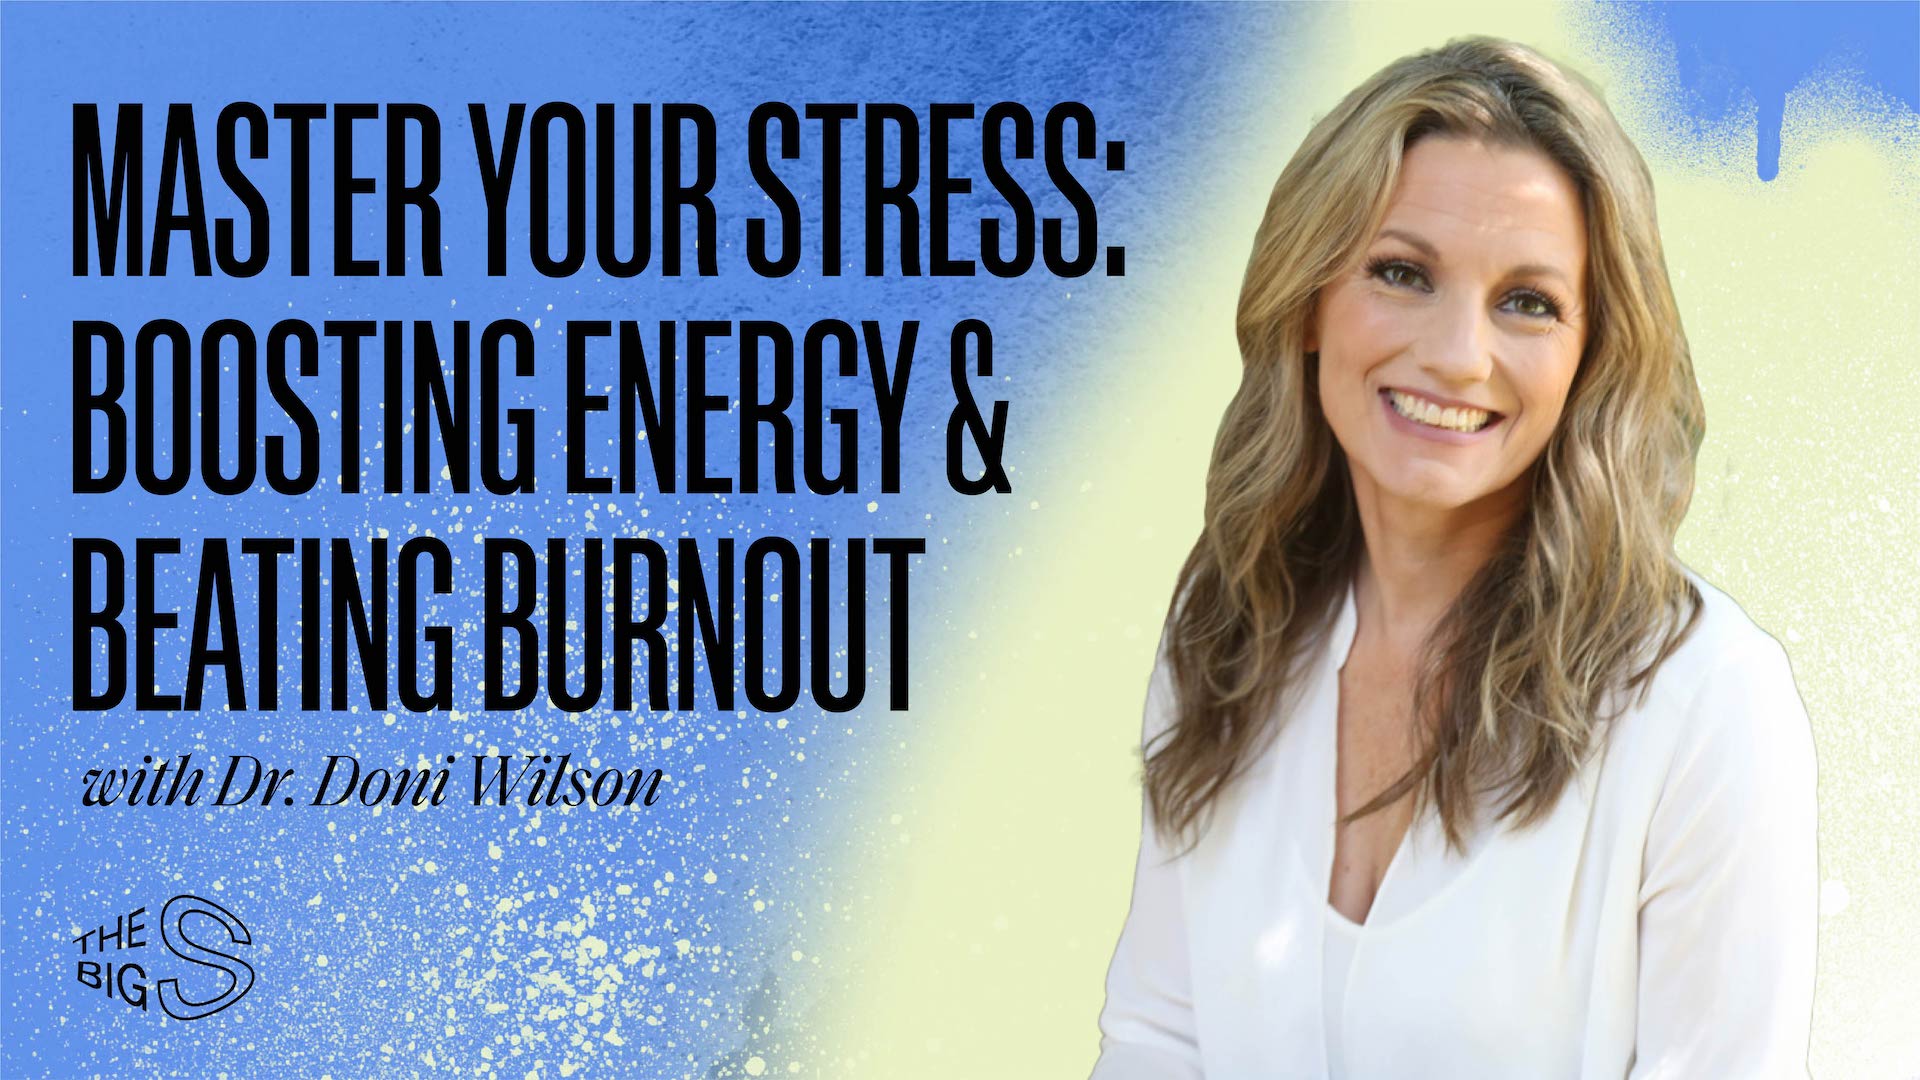 57. Master Your Stress: Boosting Energy & Beating Burnout with Dr. Doni Wilson